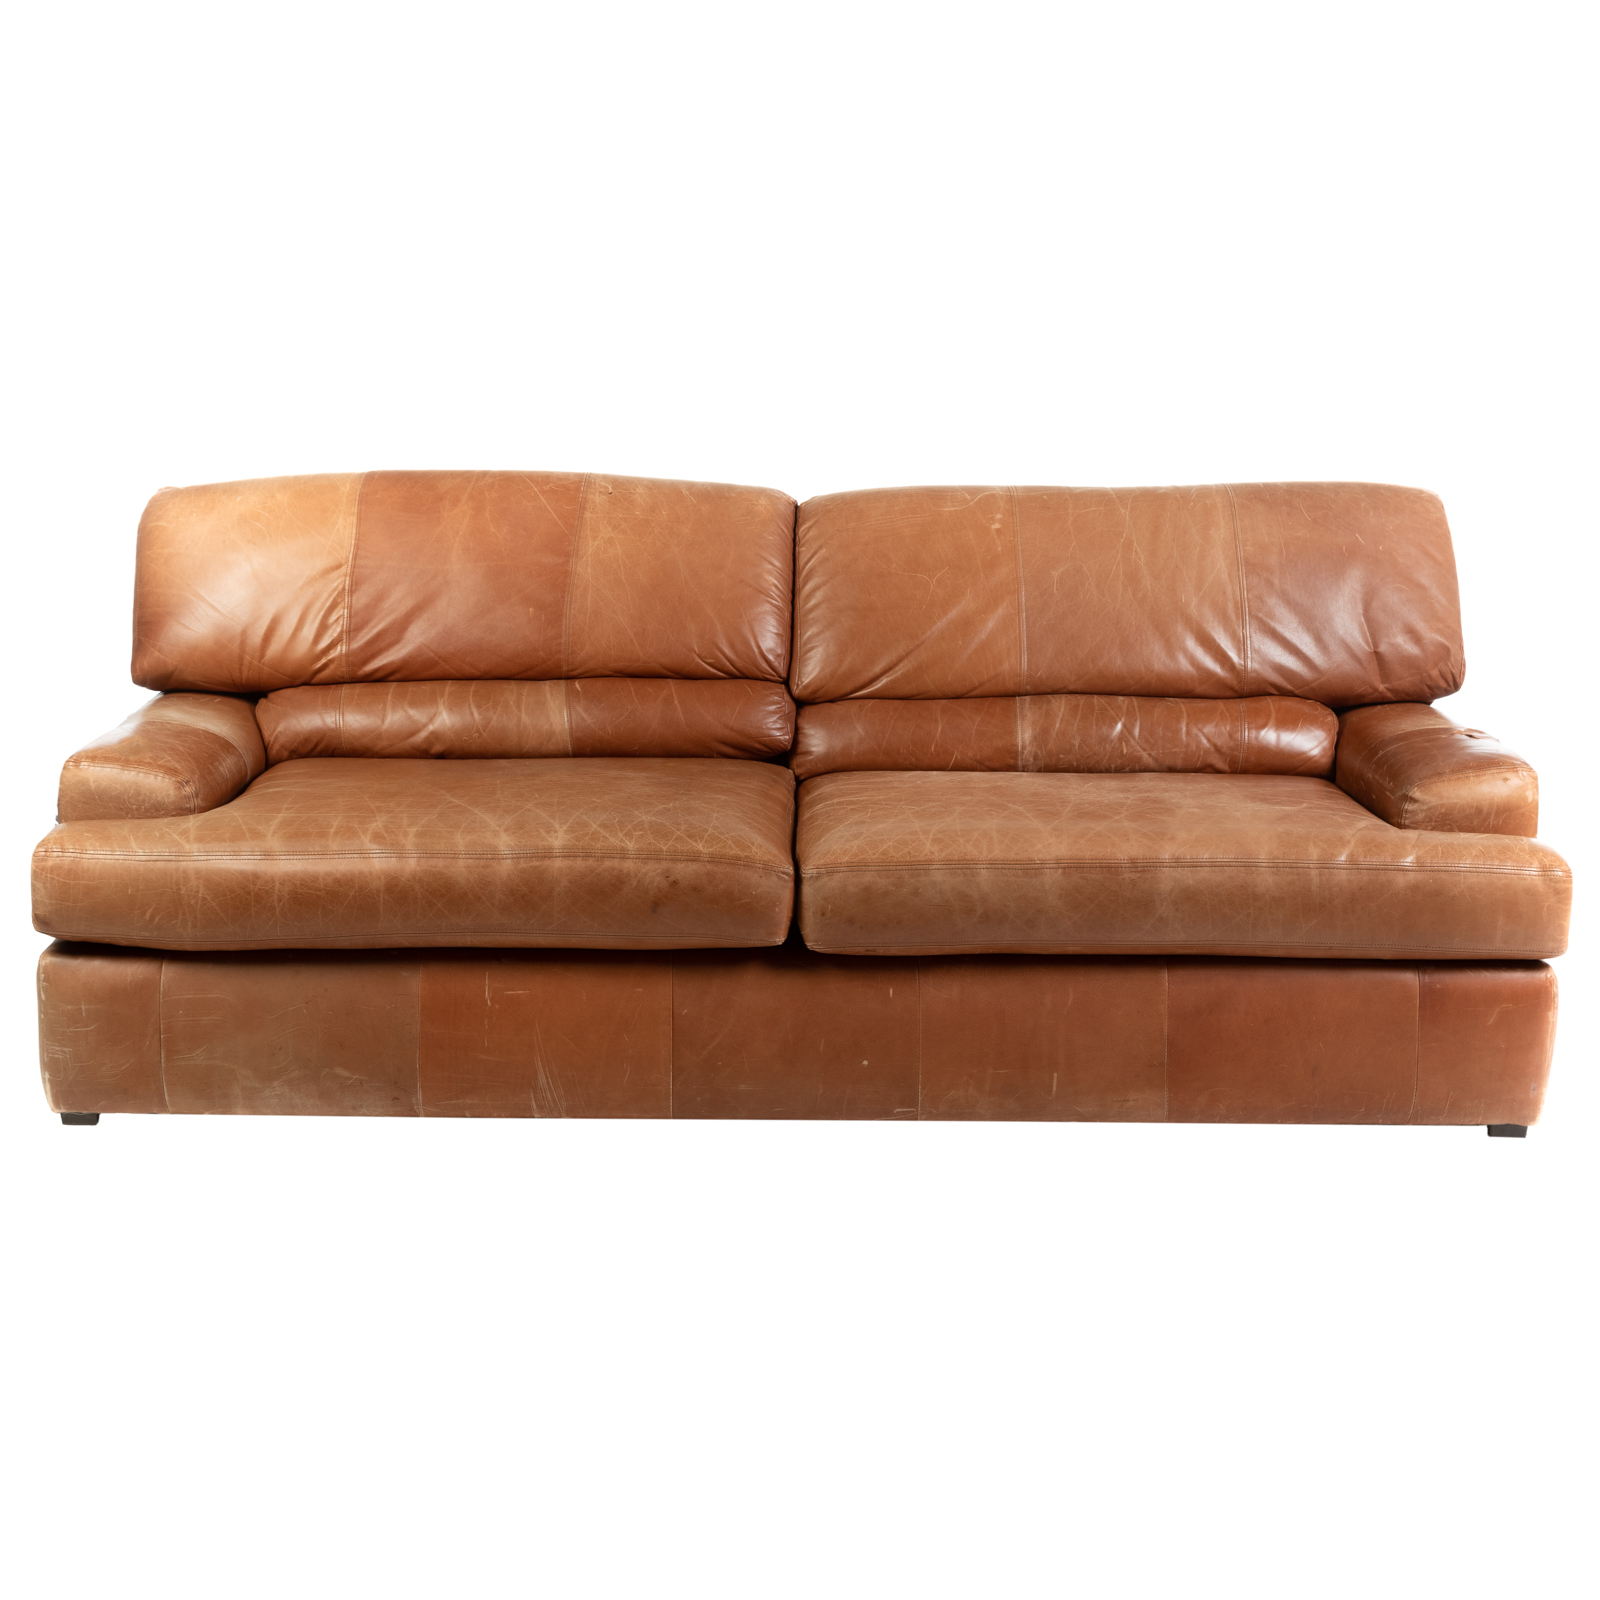 CONTEMPORARY LEATHER TWO-CUSHION